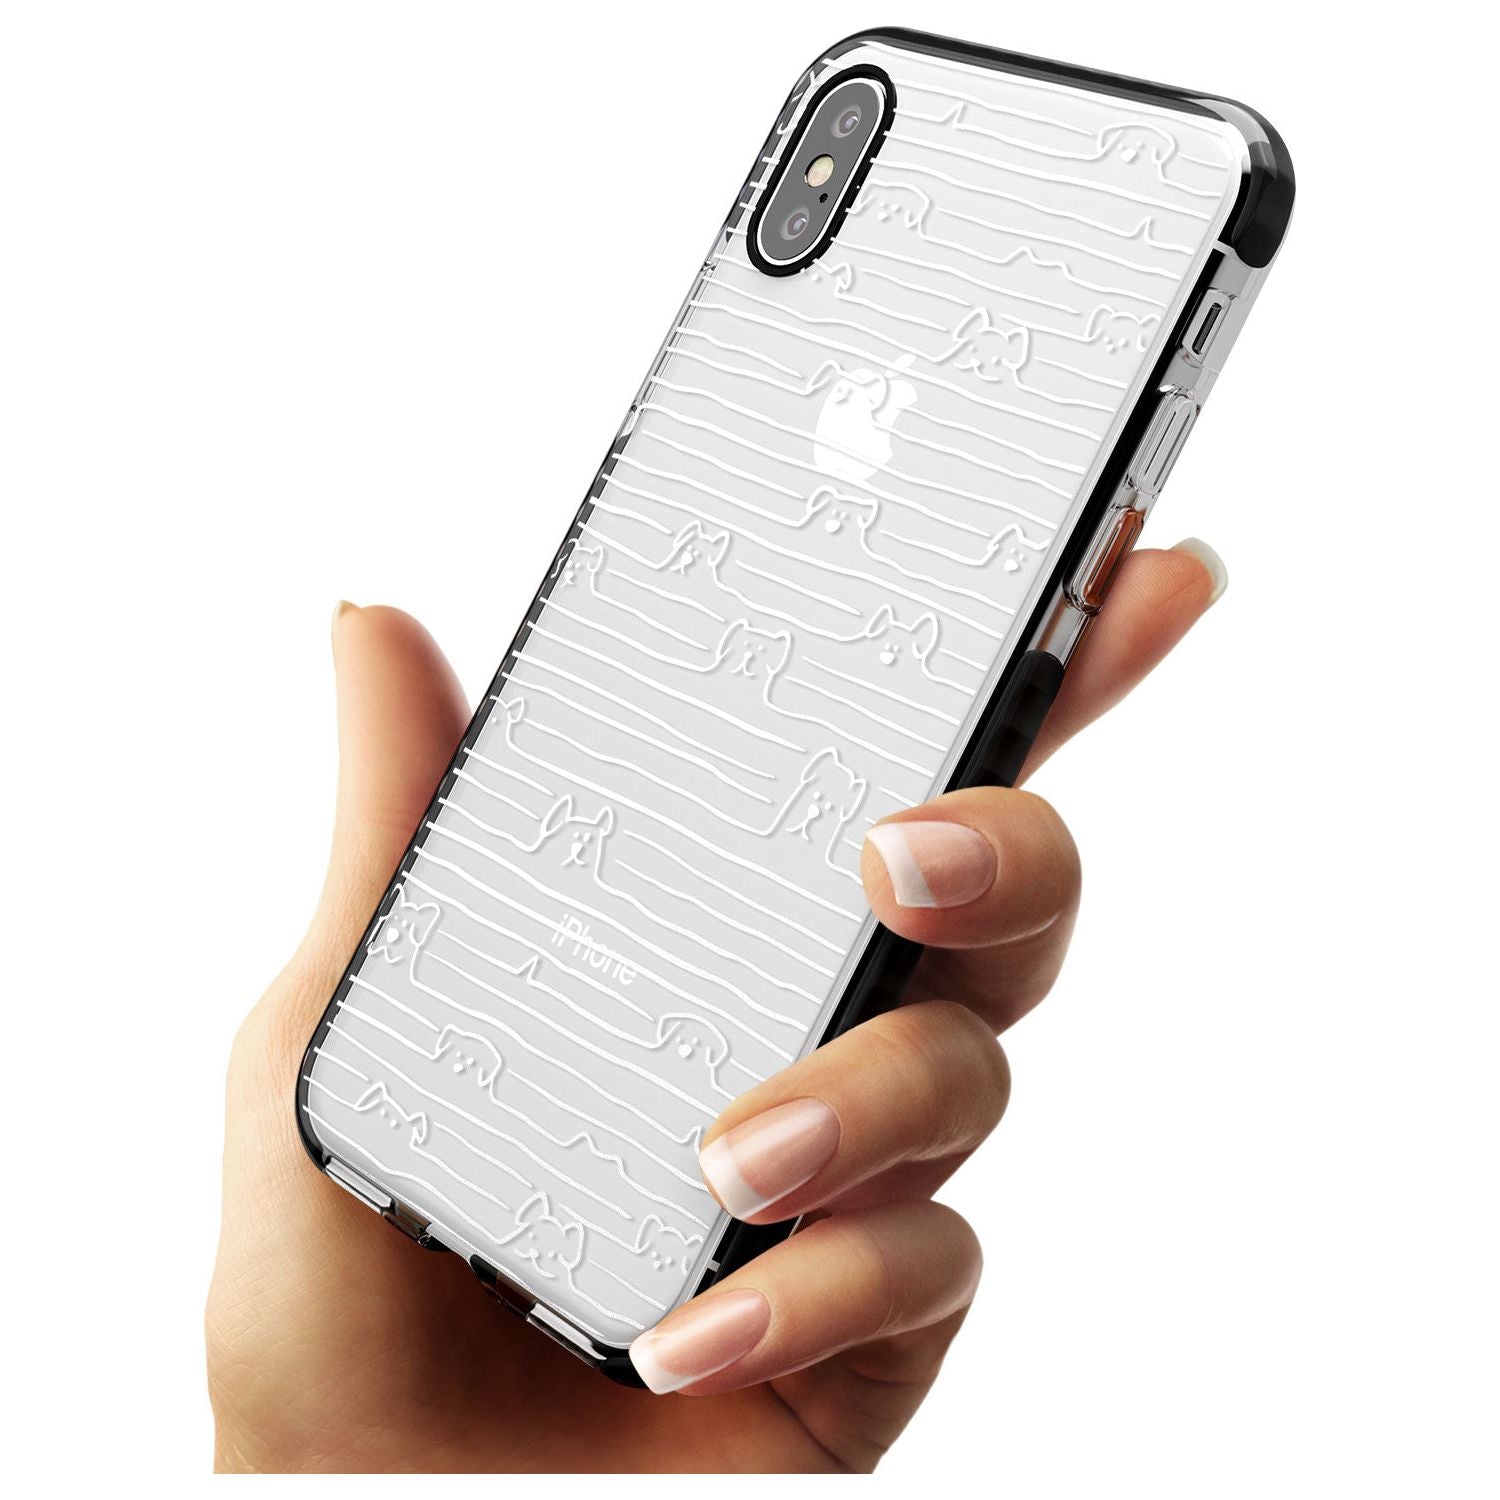 Dog Line Art - White Black Impact Phone Case for iPhone X XS Max XR